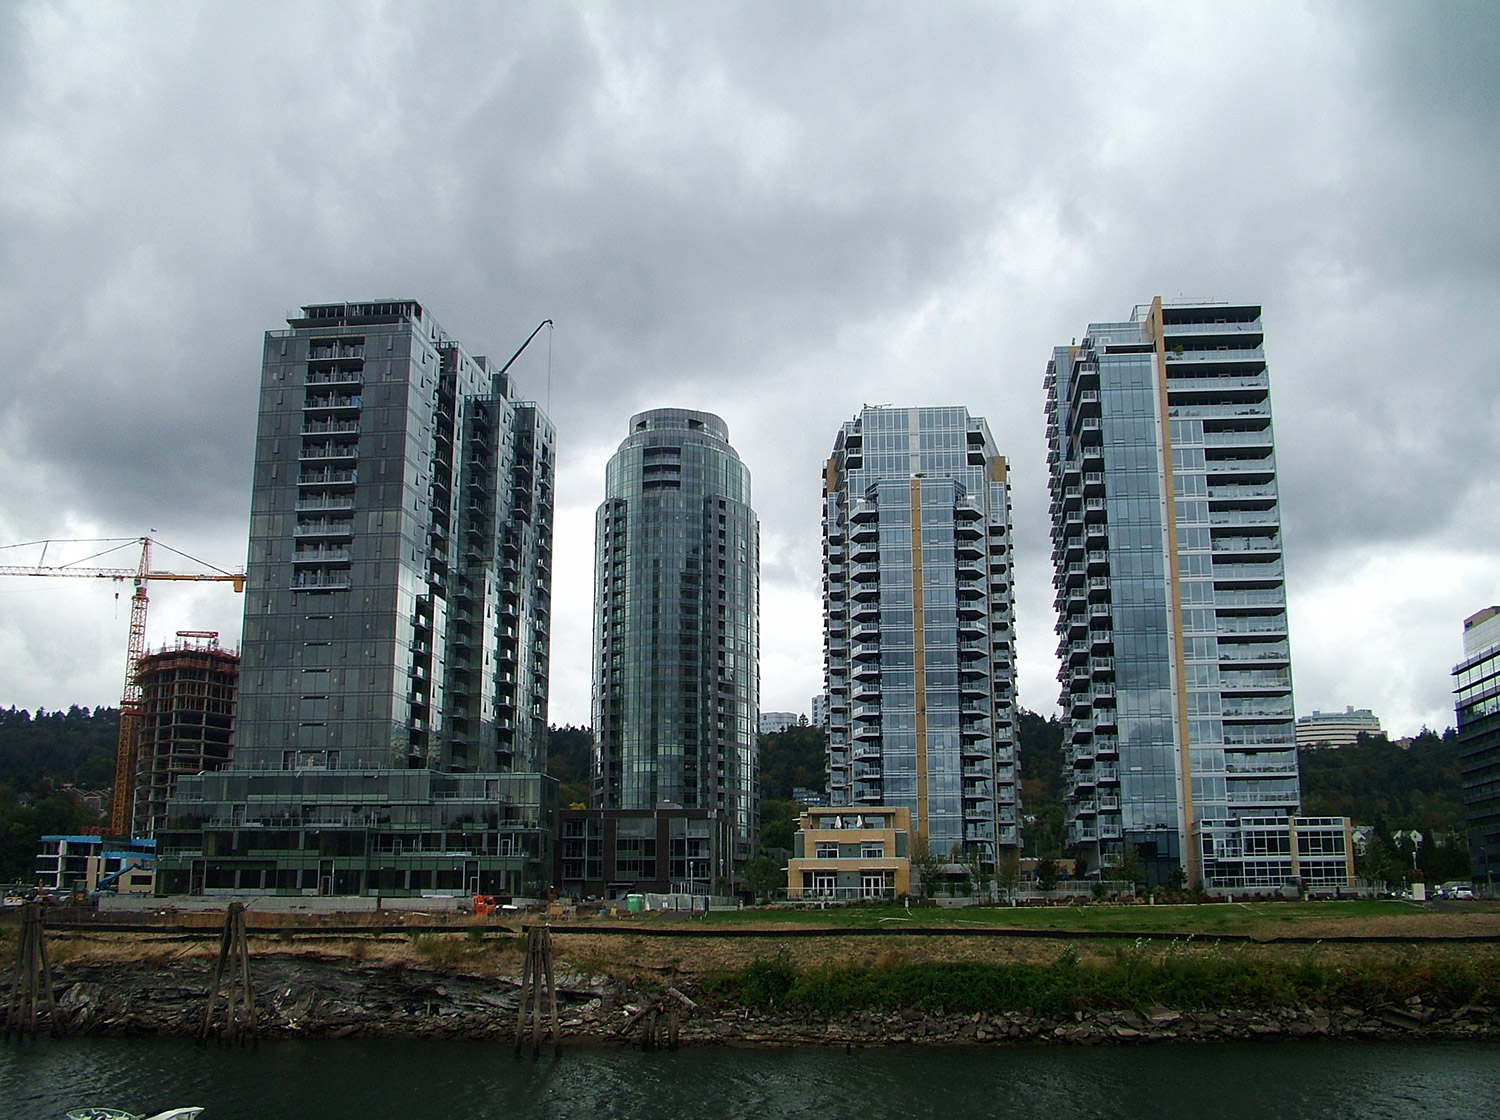 South Waterfront PDX - Portland, OR